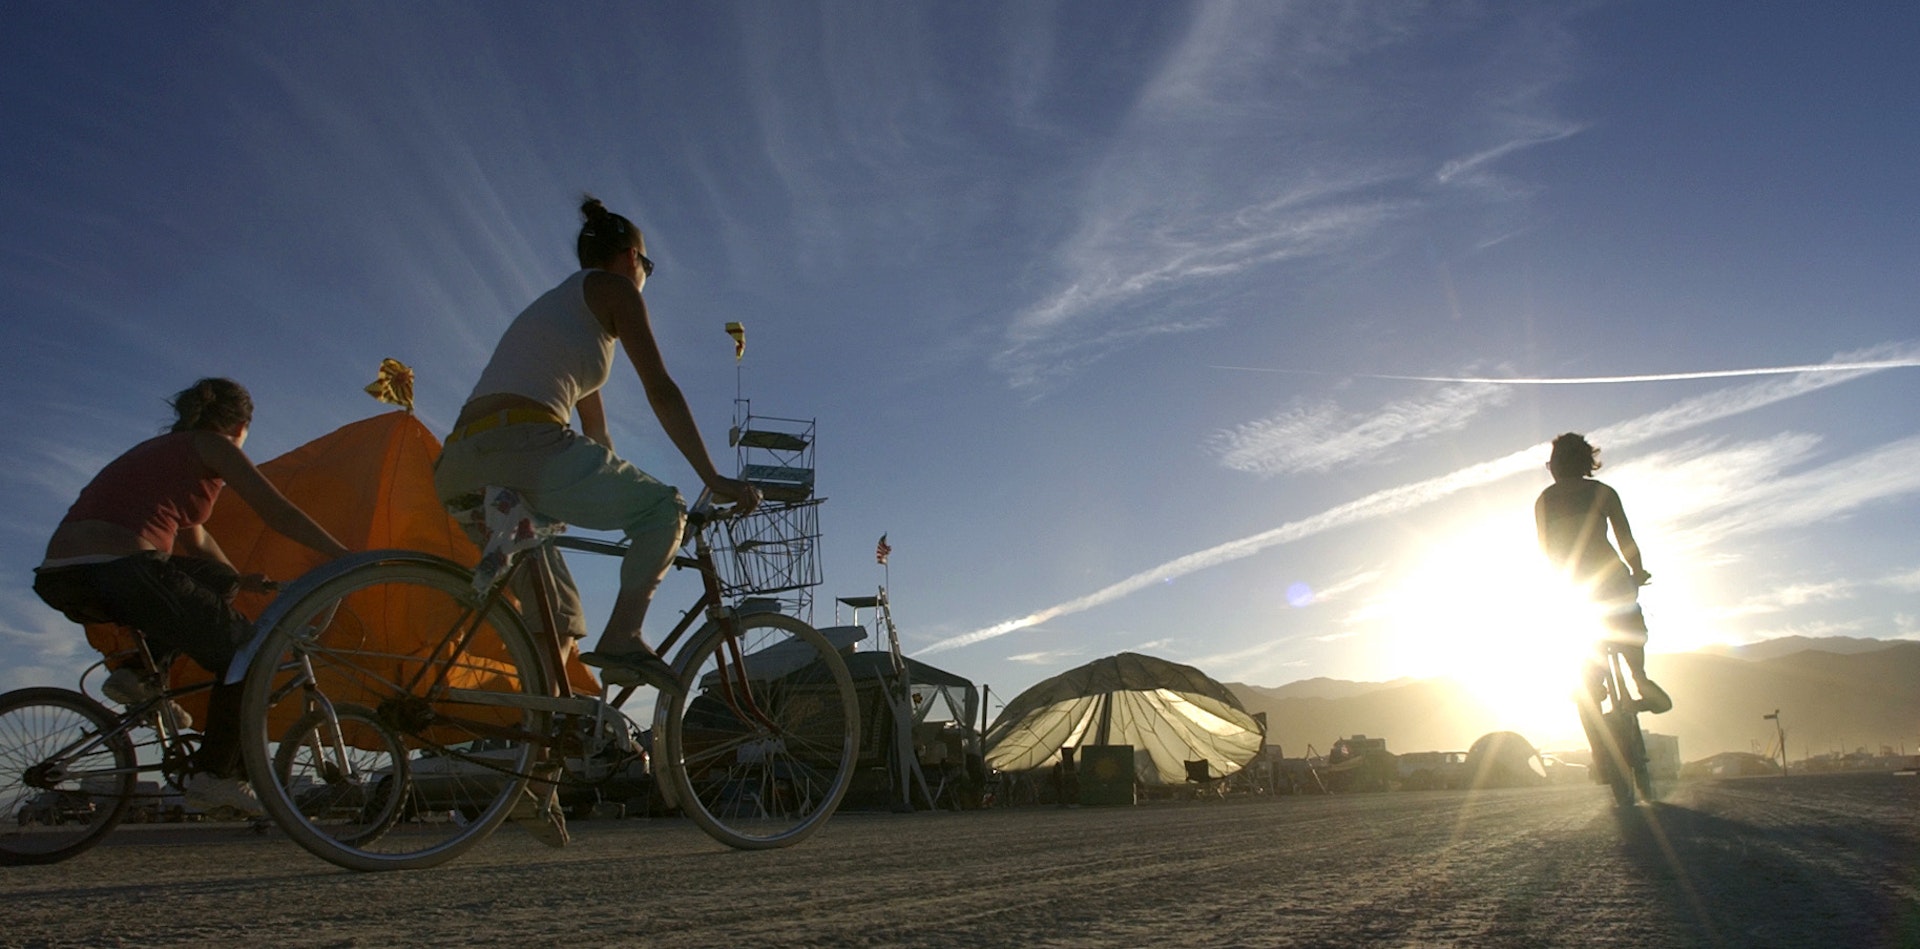 Cyclists ride through the desert on the eve of the official opening of Burning Man